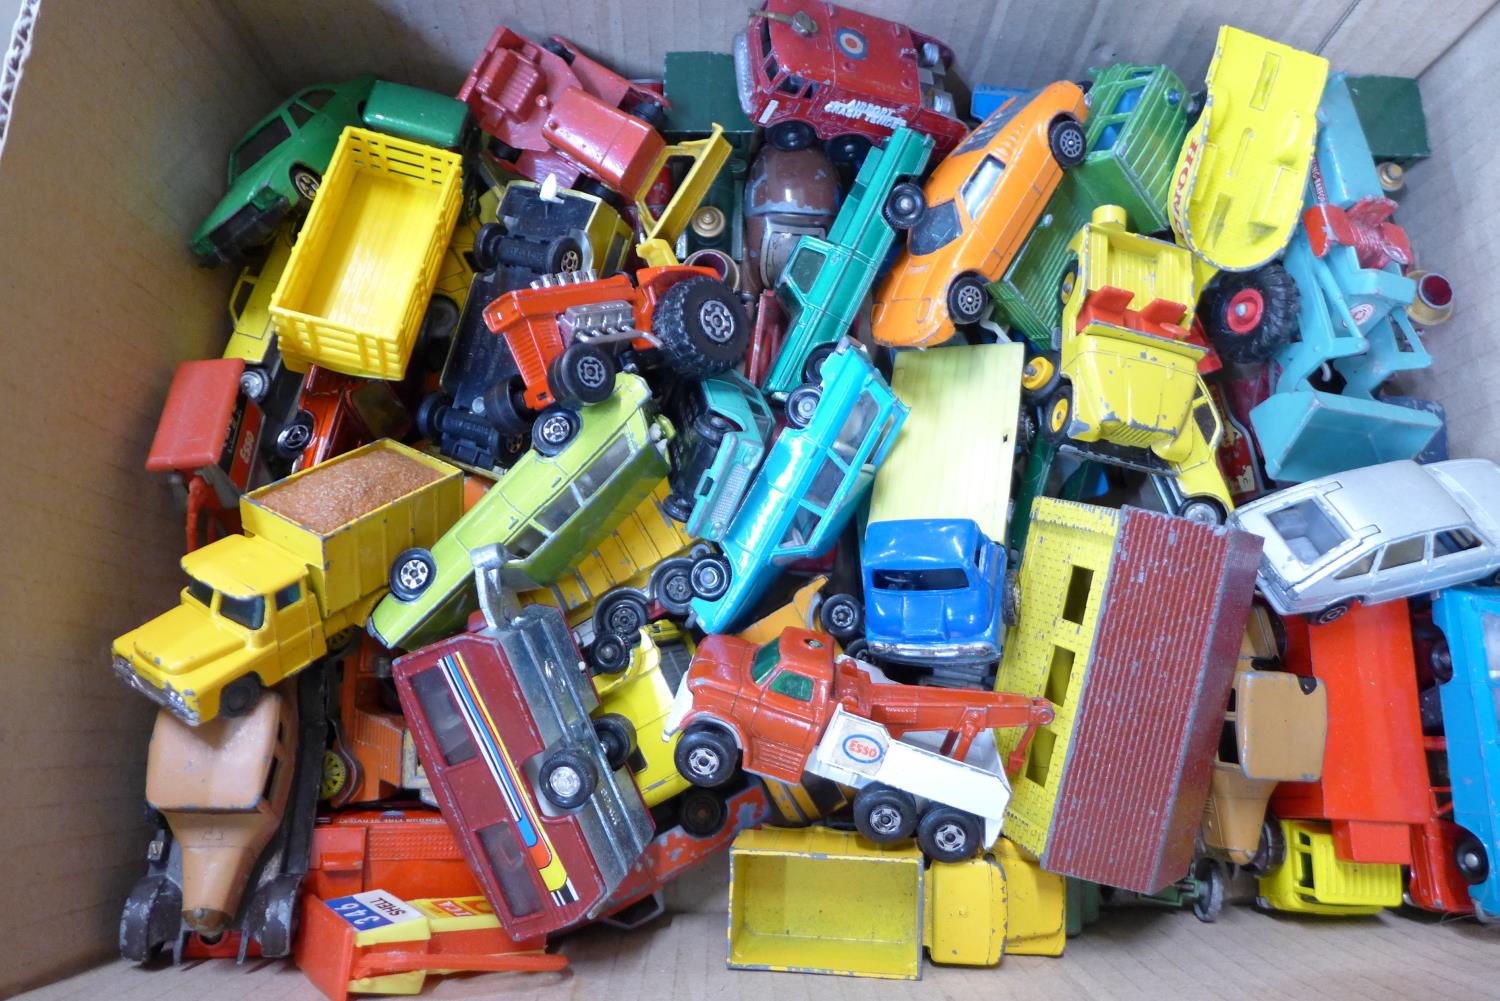 A collection of die-cast model vehicles